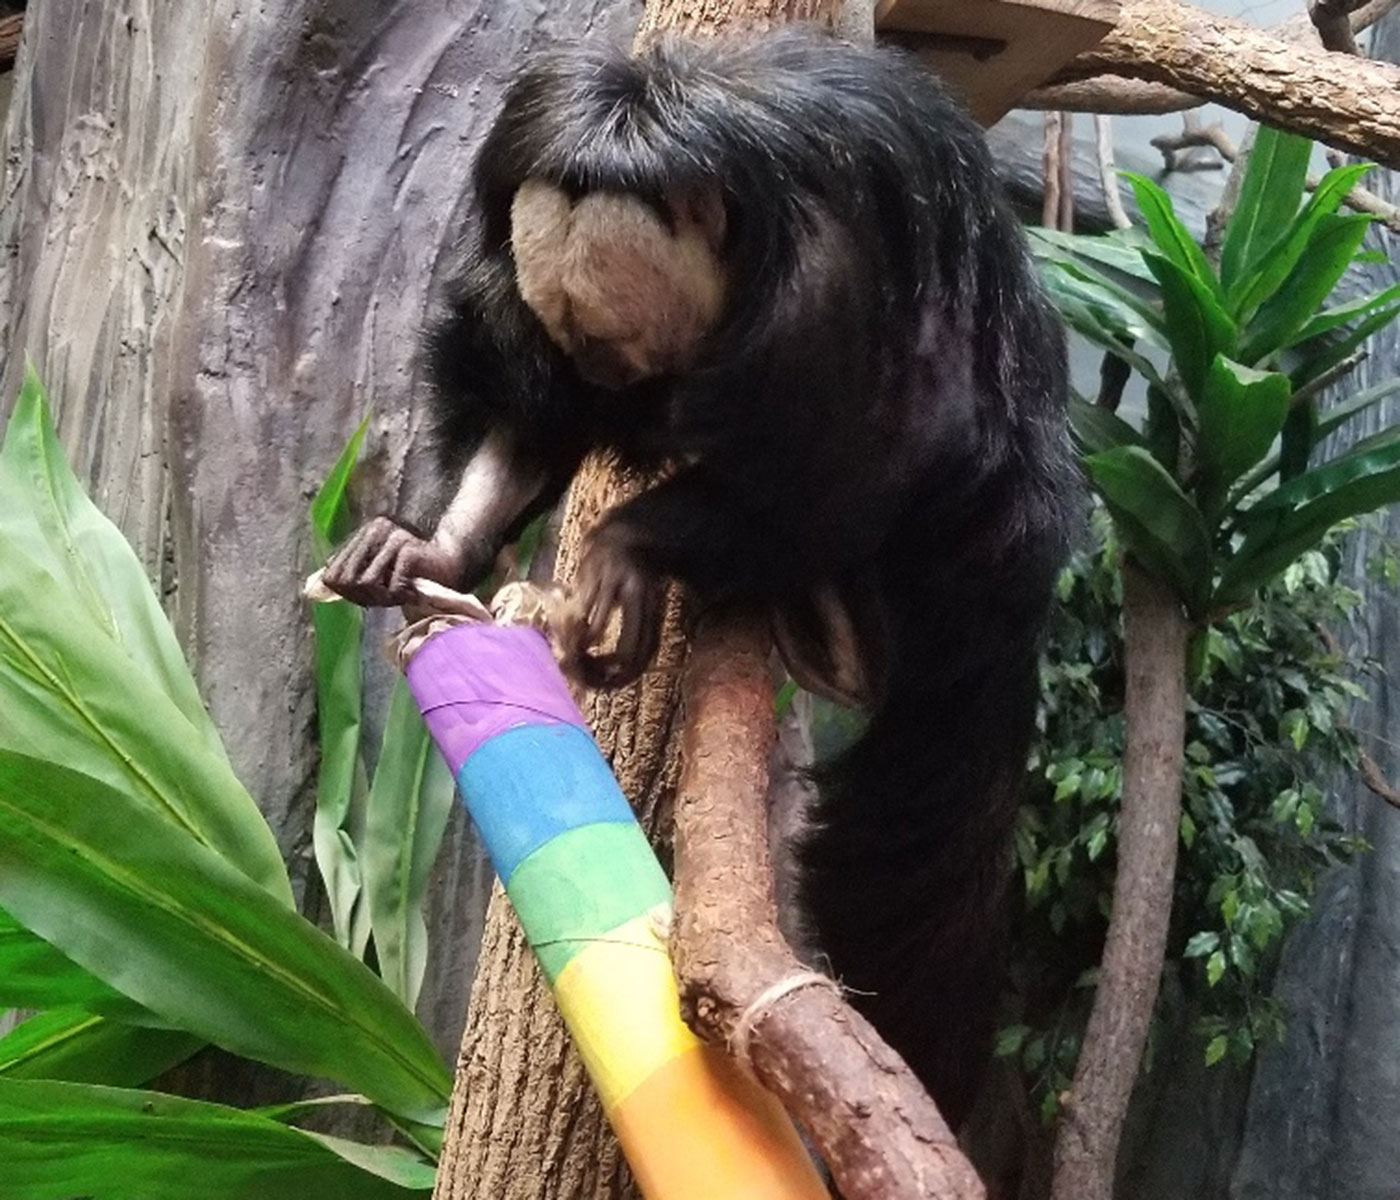 A saki monkey searches for treats inside a cardboard tube painted in rainbow colors